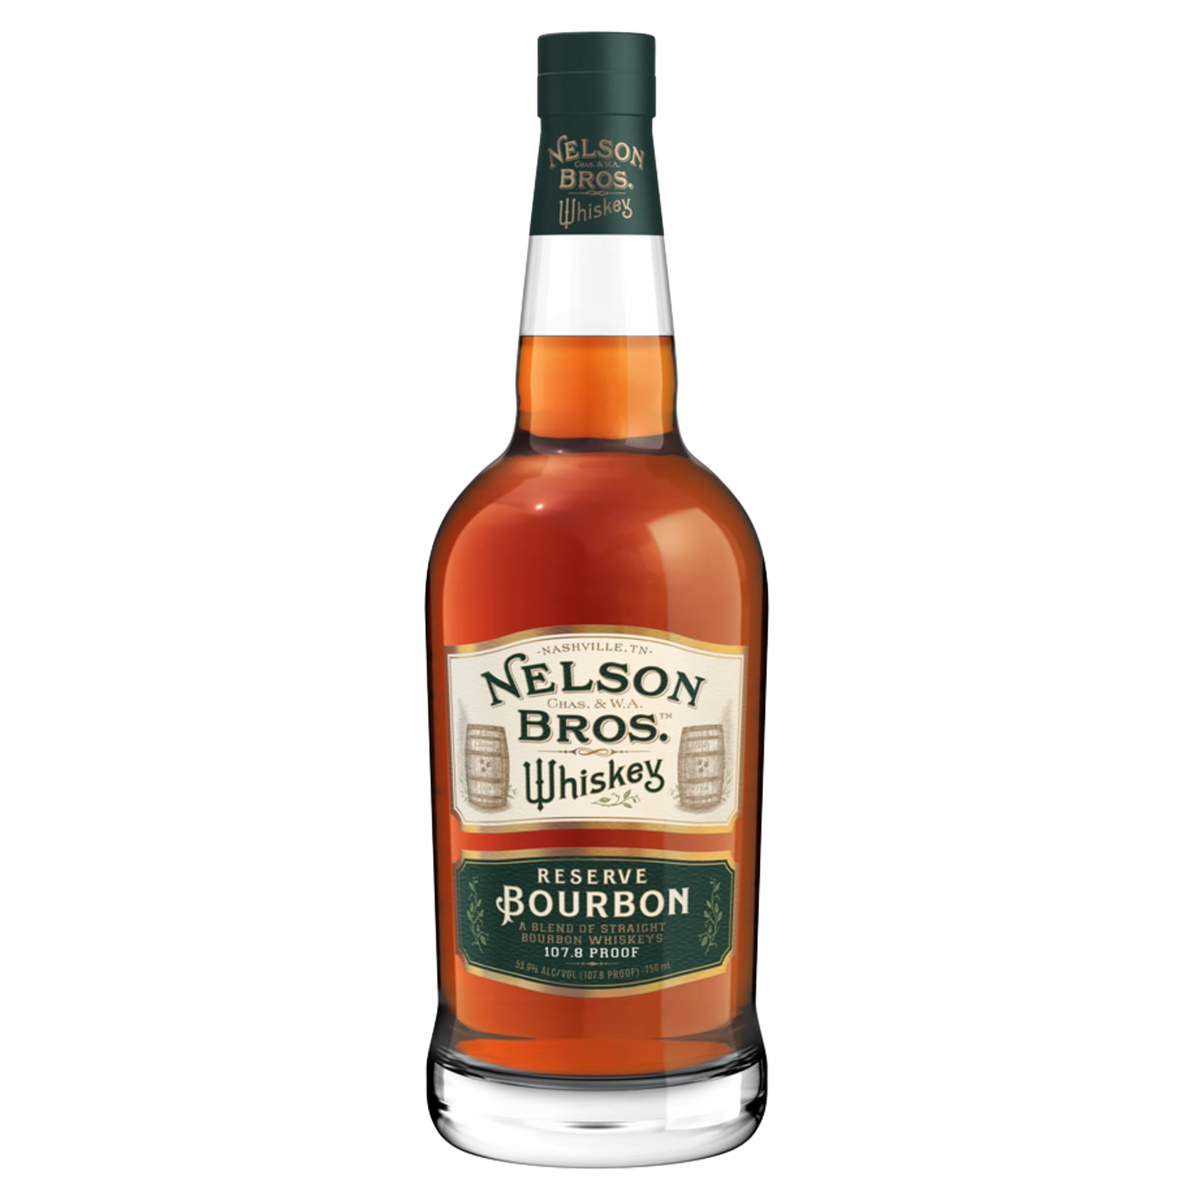 Nelson Brothers Reserve Bourbon Whiskey (750ml)